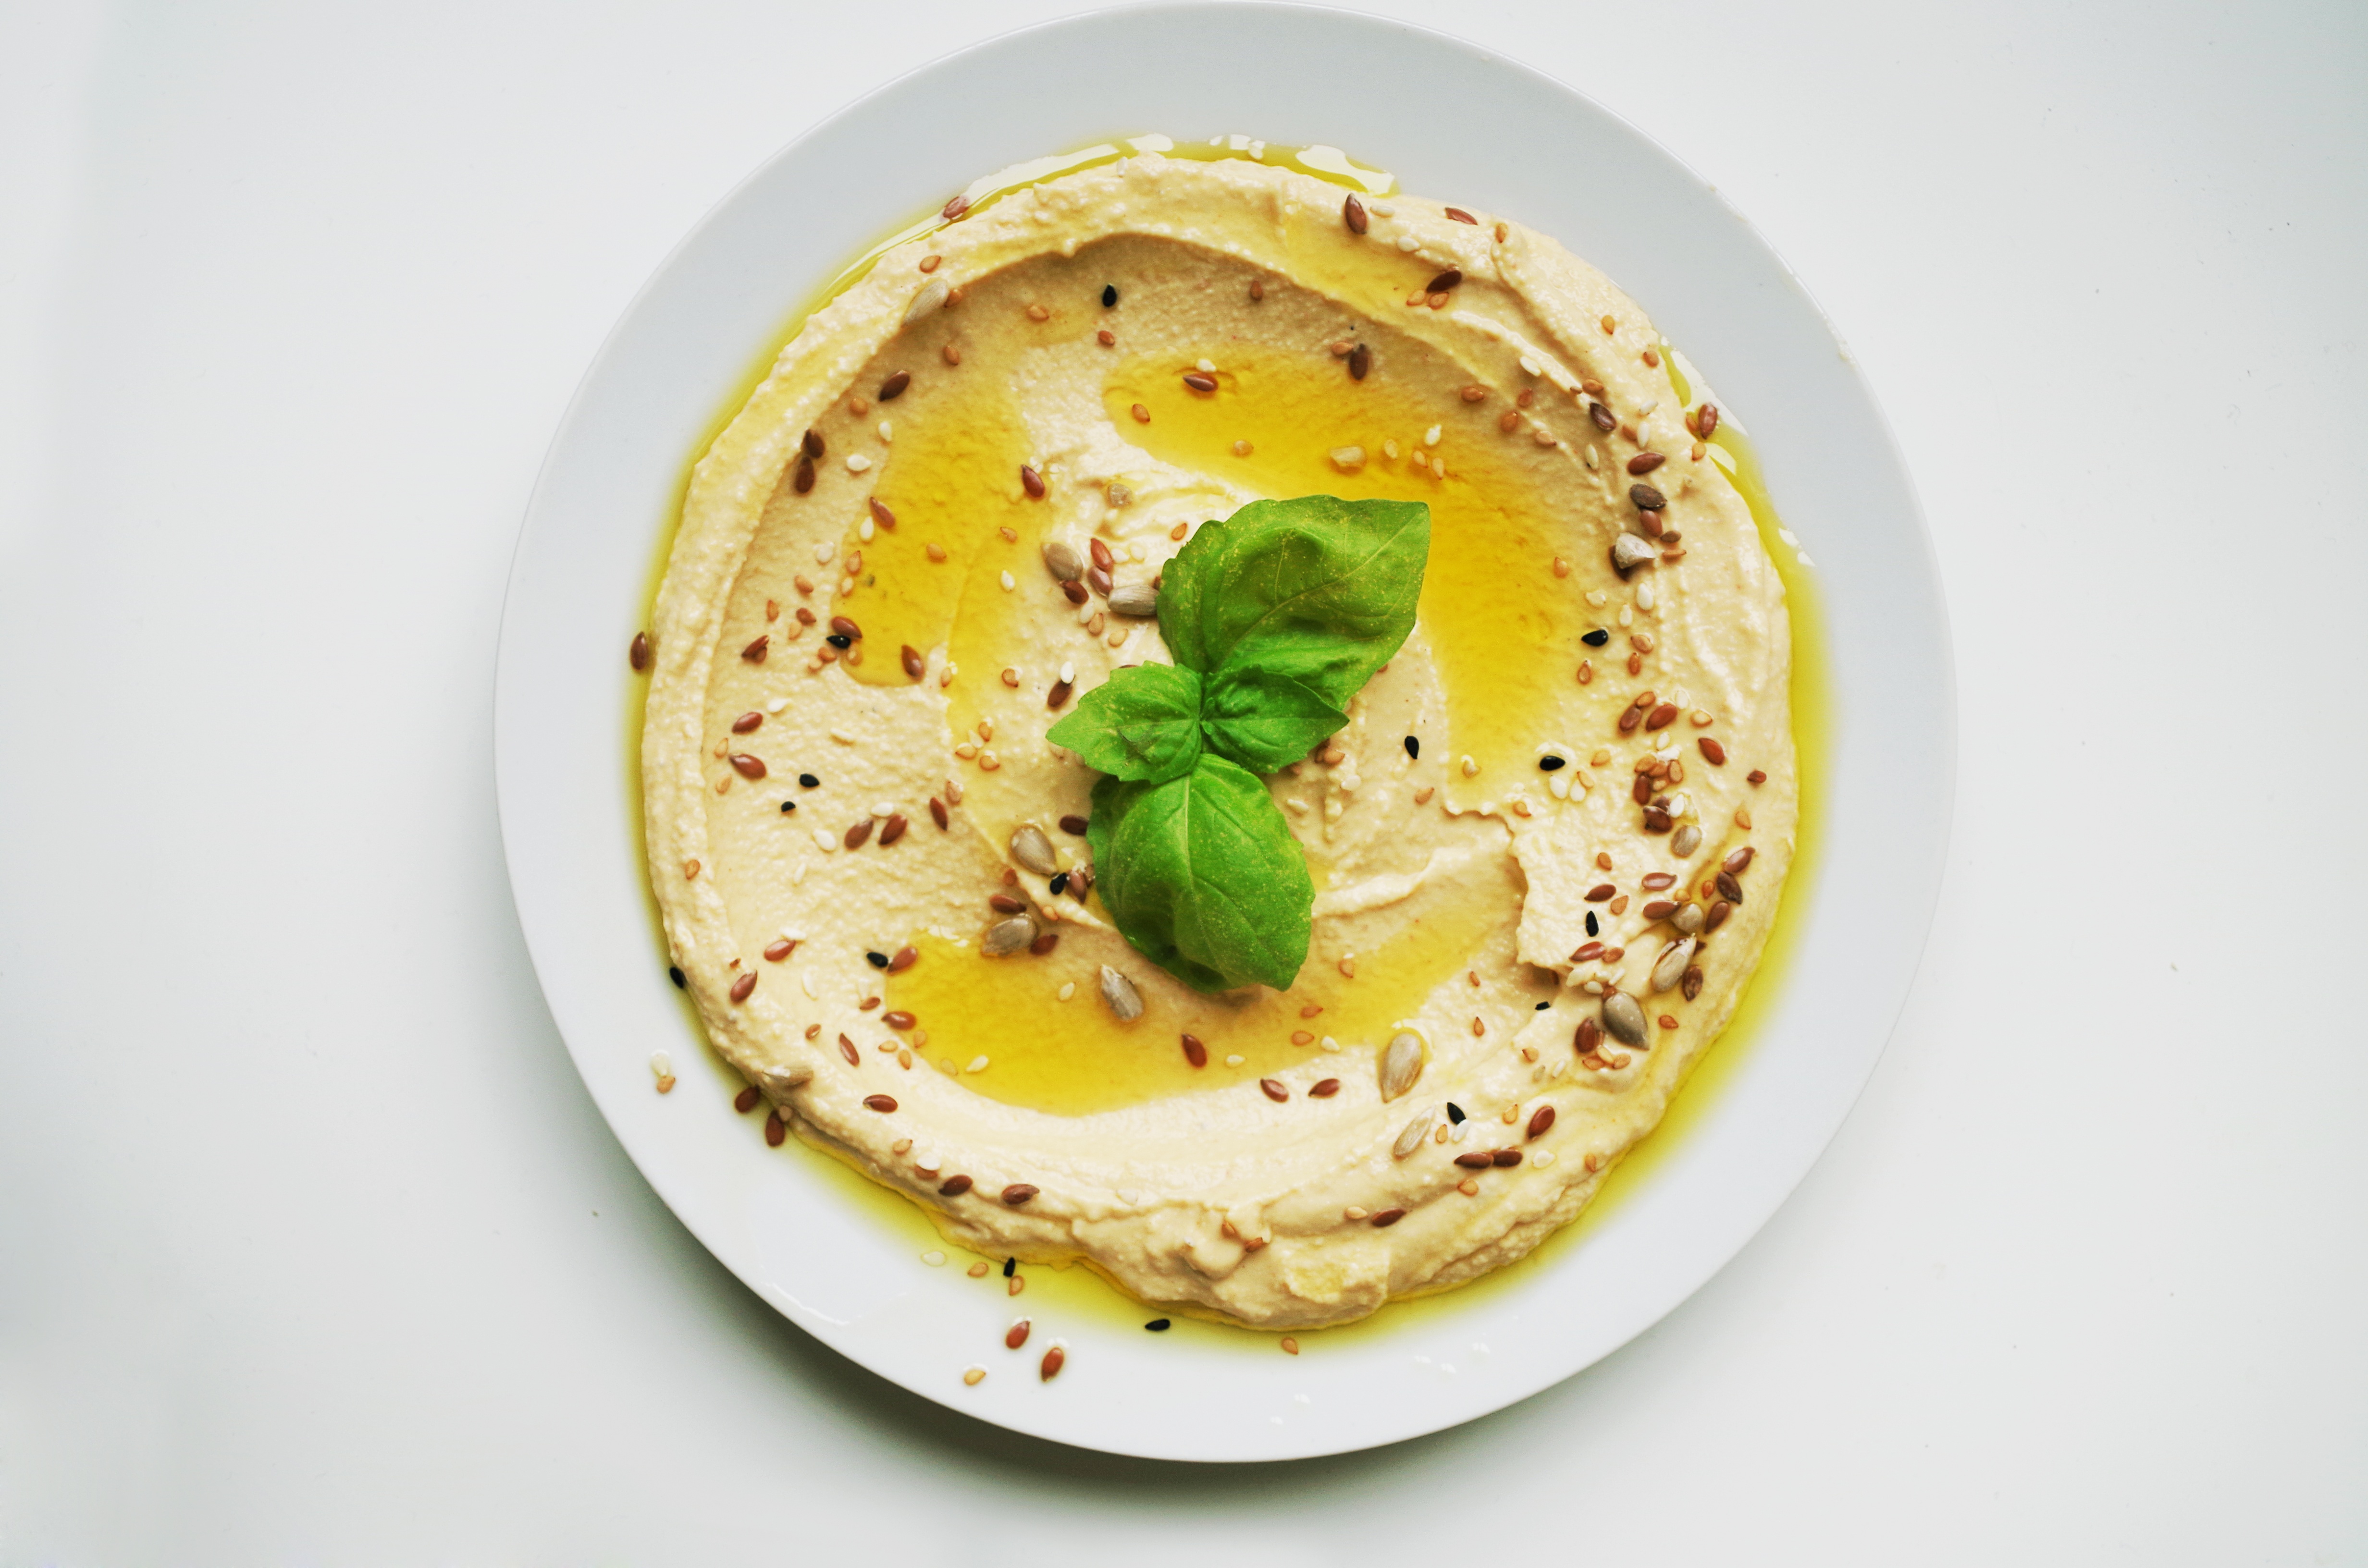 Hummus with oil and seeds on a white plate.